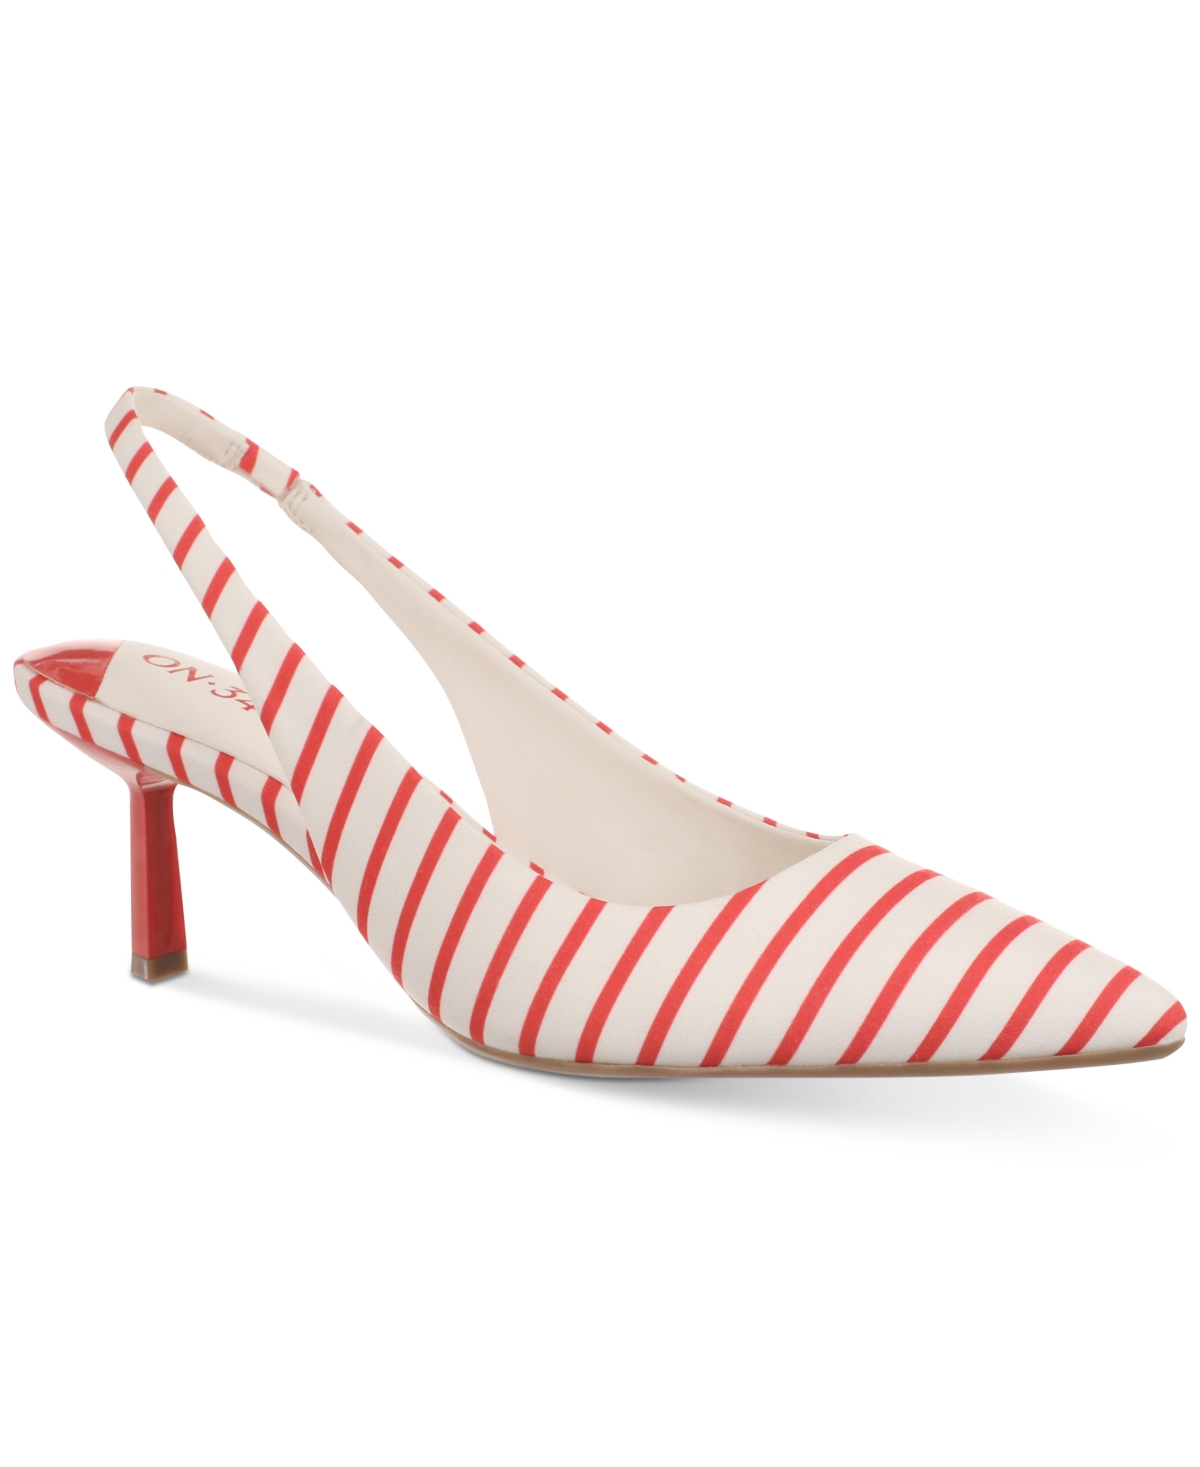 Women's Baeley Slingback Pumps, Created for Macy's - Red Stripe Fabric